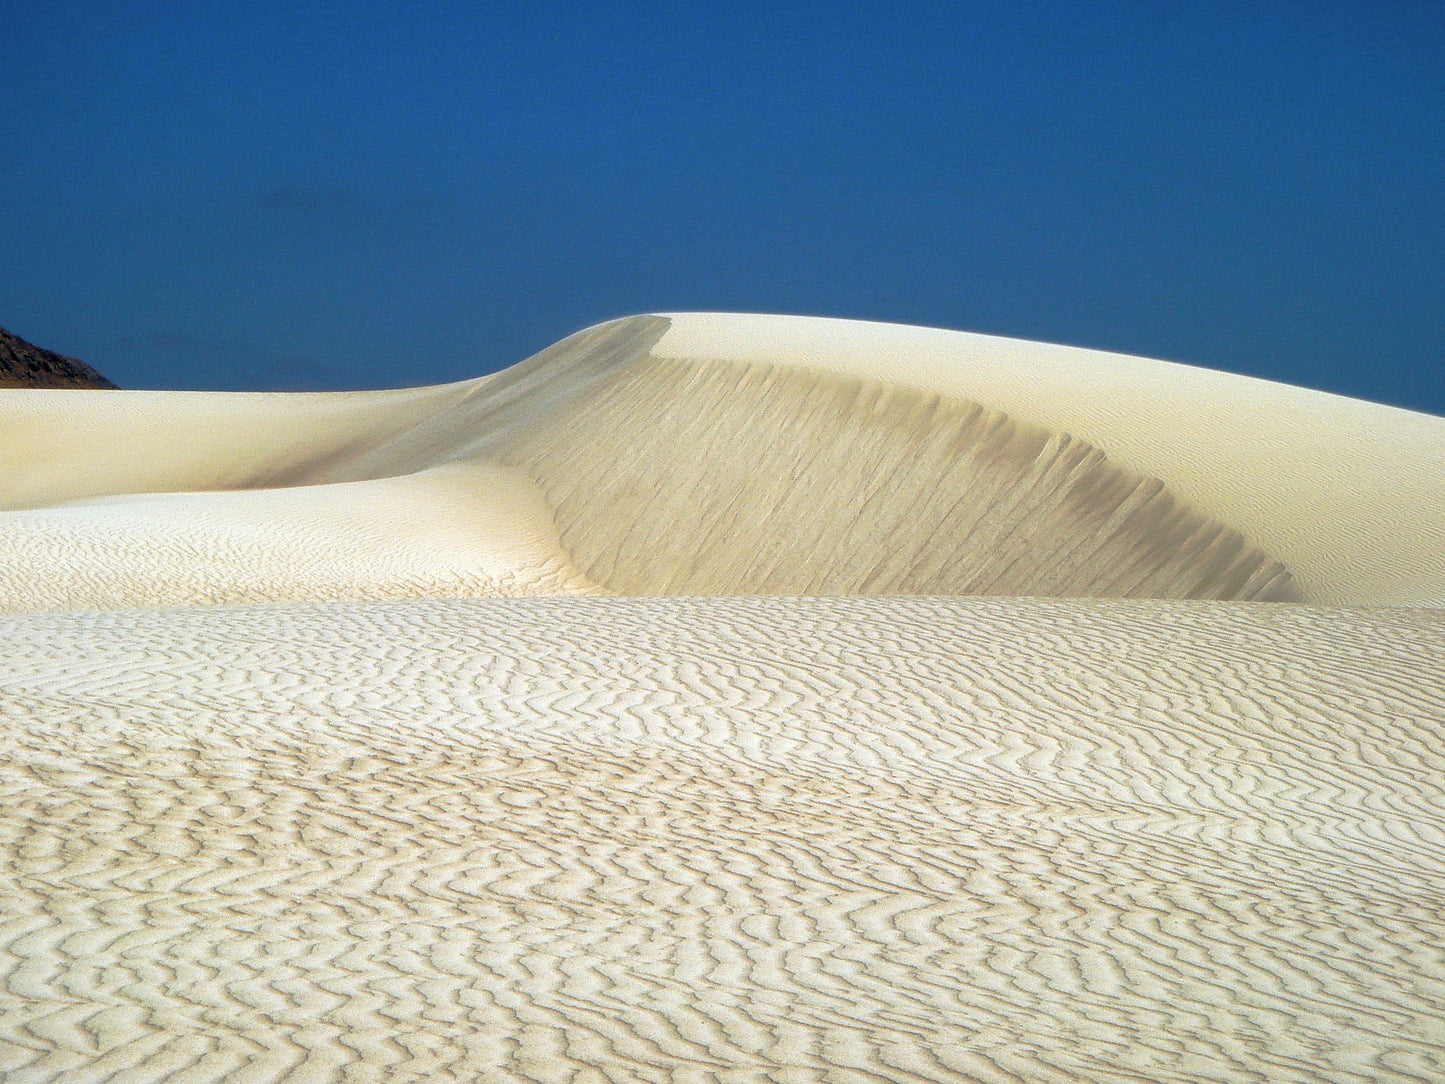 Socotra Dunes, 2023, giclee print on wrapped canvas, 24 x 18 in. / 60.96 x 45.74 cm.